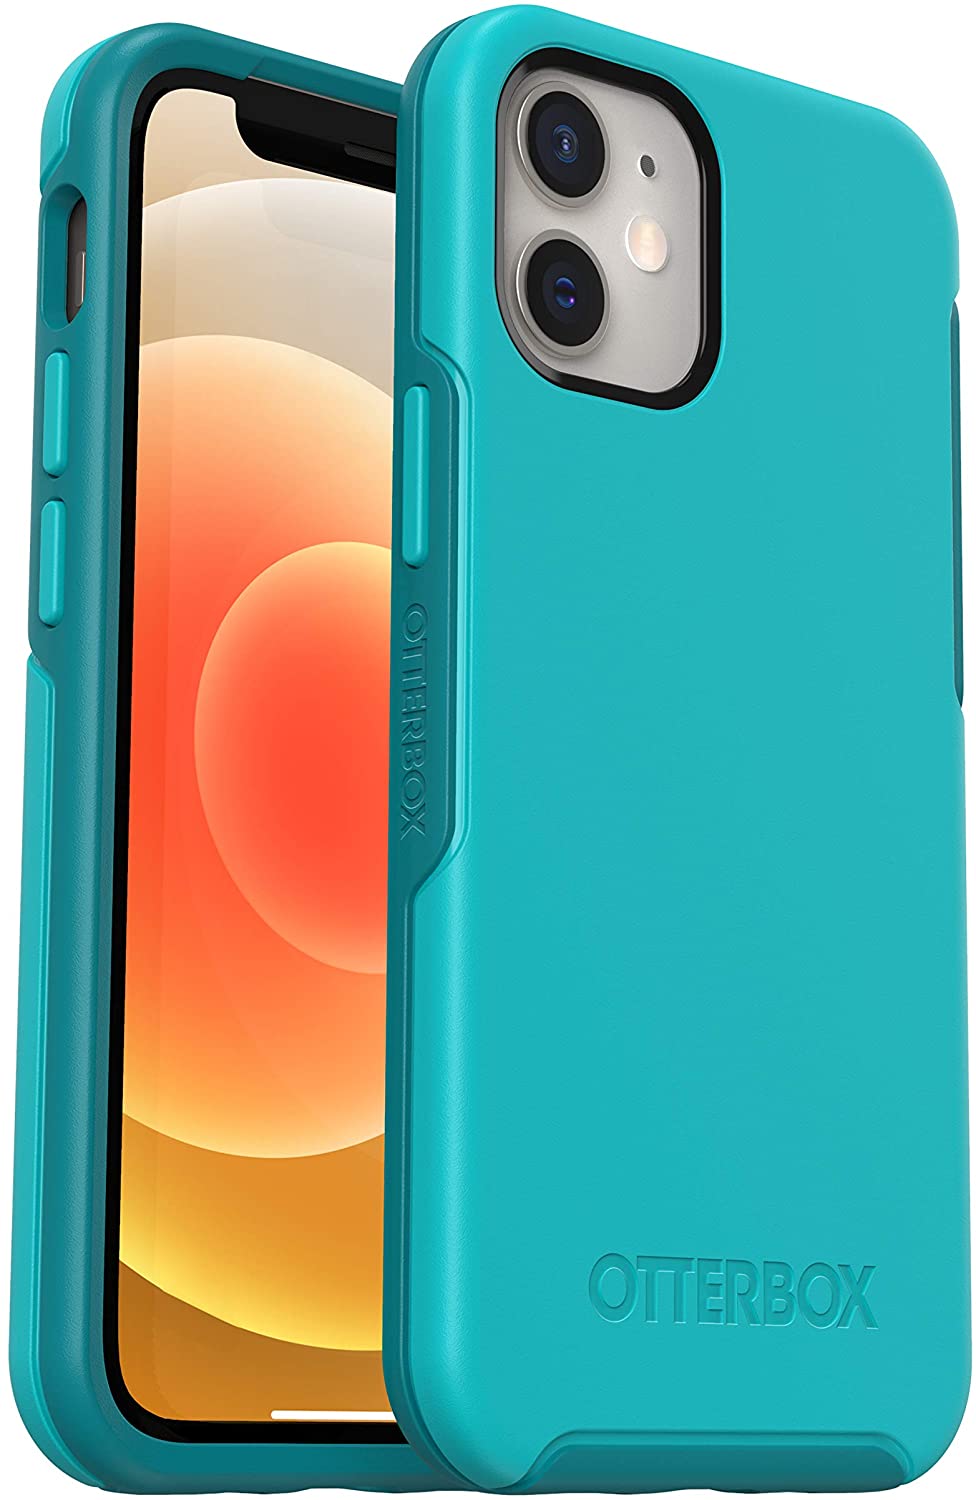 OtterBox SYMMETRY SERIES Case for Apple iPhone 12 Mini - Rock Candy (Certified Refurbished)